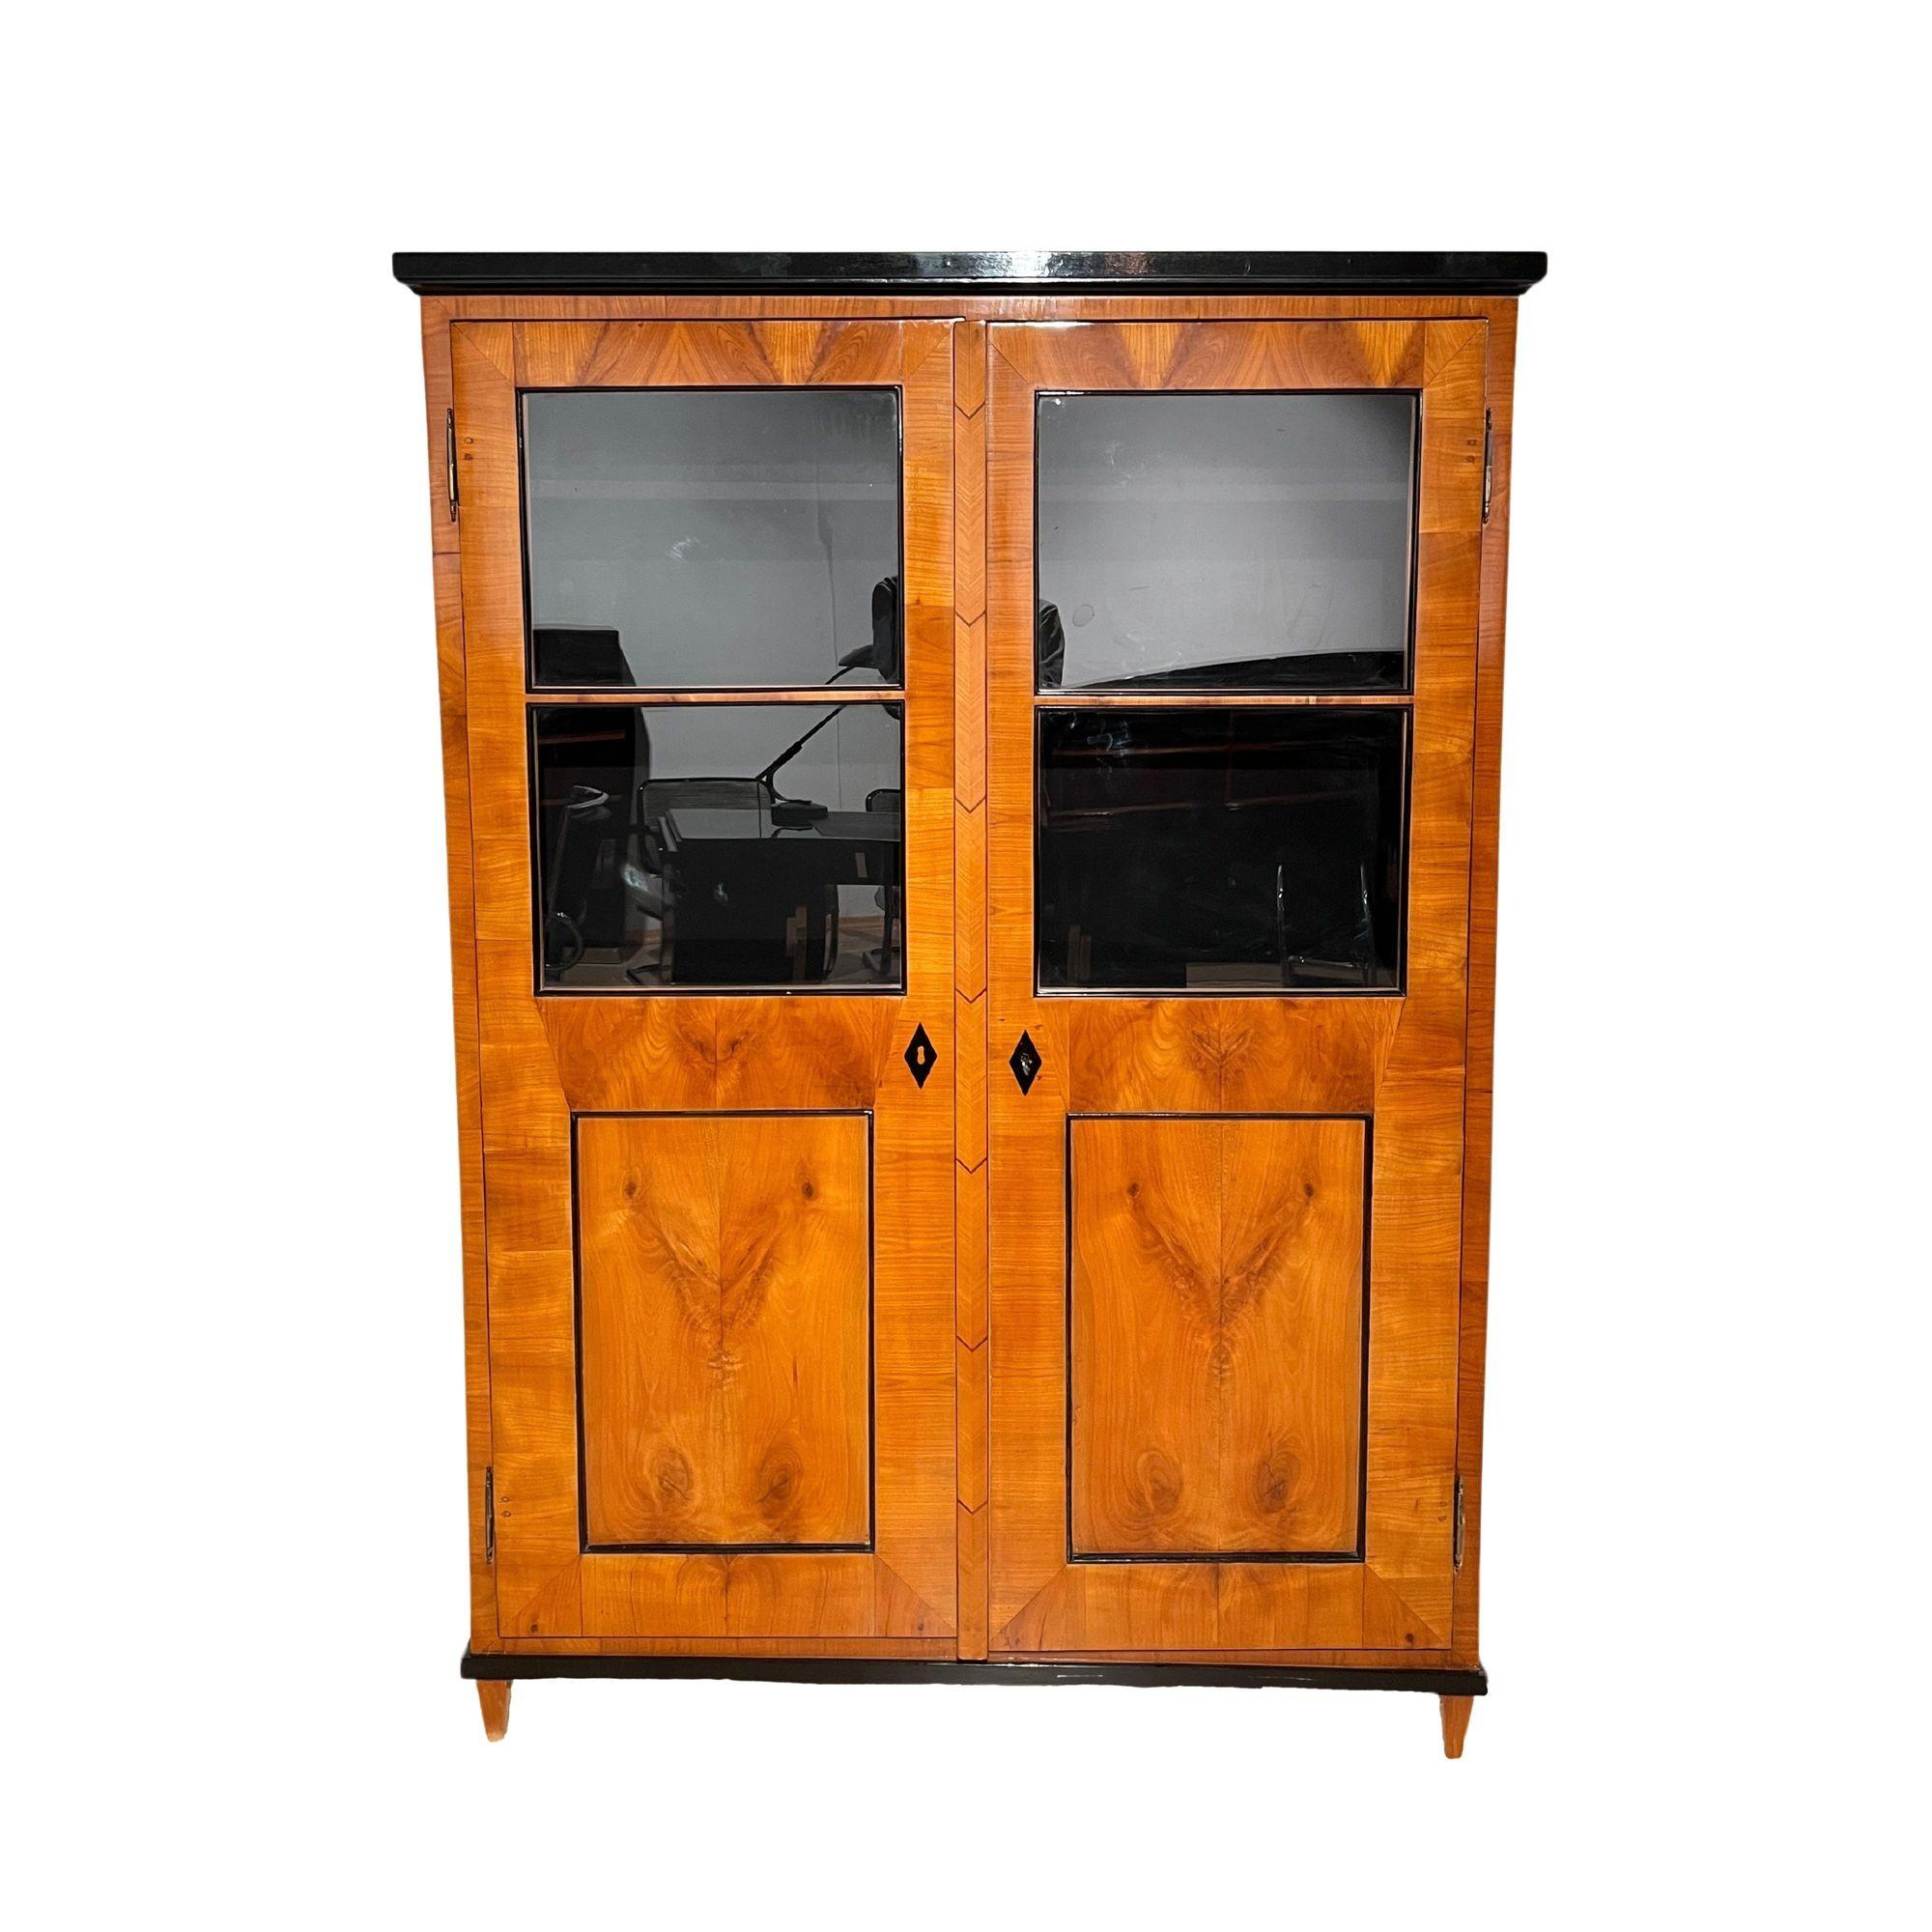 Beautiful, straightlined Biedermeier bookcase or display cabinet in cherry wood veneer from southern Germany around 1820.
* Blonde book-matched cherry wood veneered on softwood.
* The door's end strip is also a mirror image and veneered on three